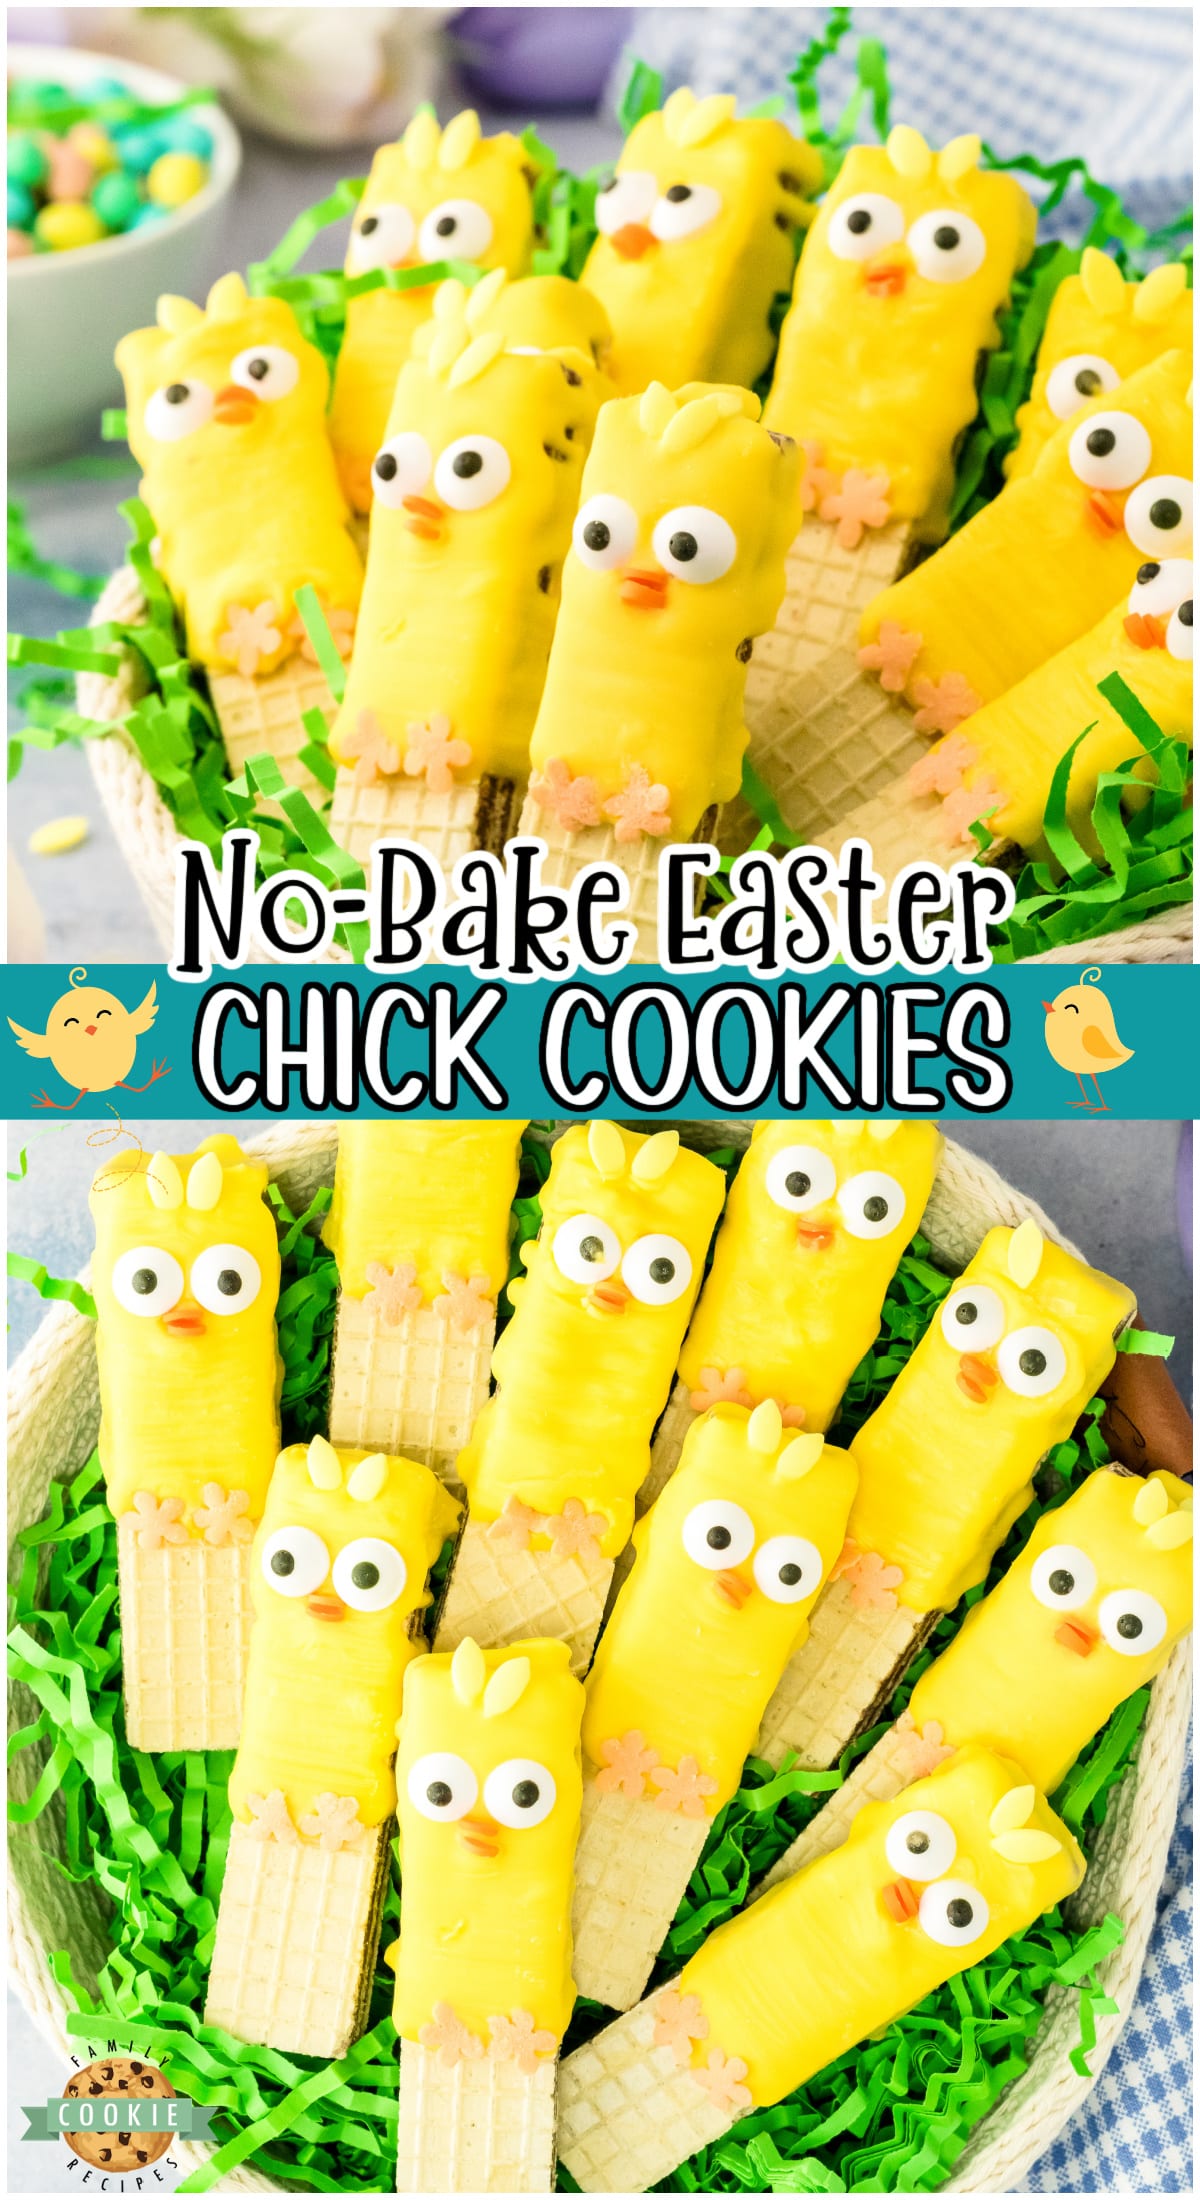 Easy No-Bake Easter Chick Cookies made with wafer cookies dipped in candy coating & decorated to look like darling baby chicks! Simple, quick & fun Easter cookie recipe that's done in under an hour! 